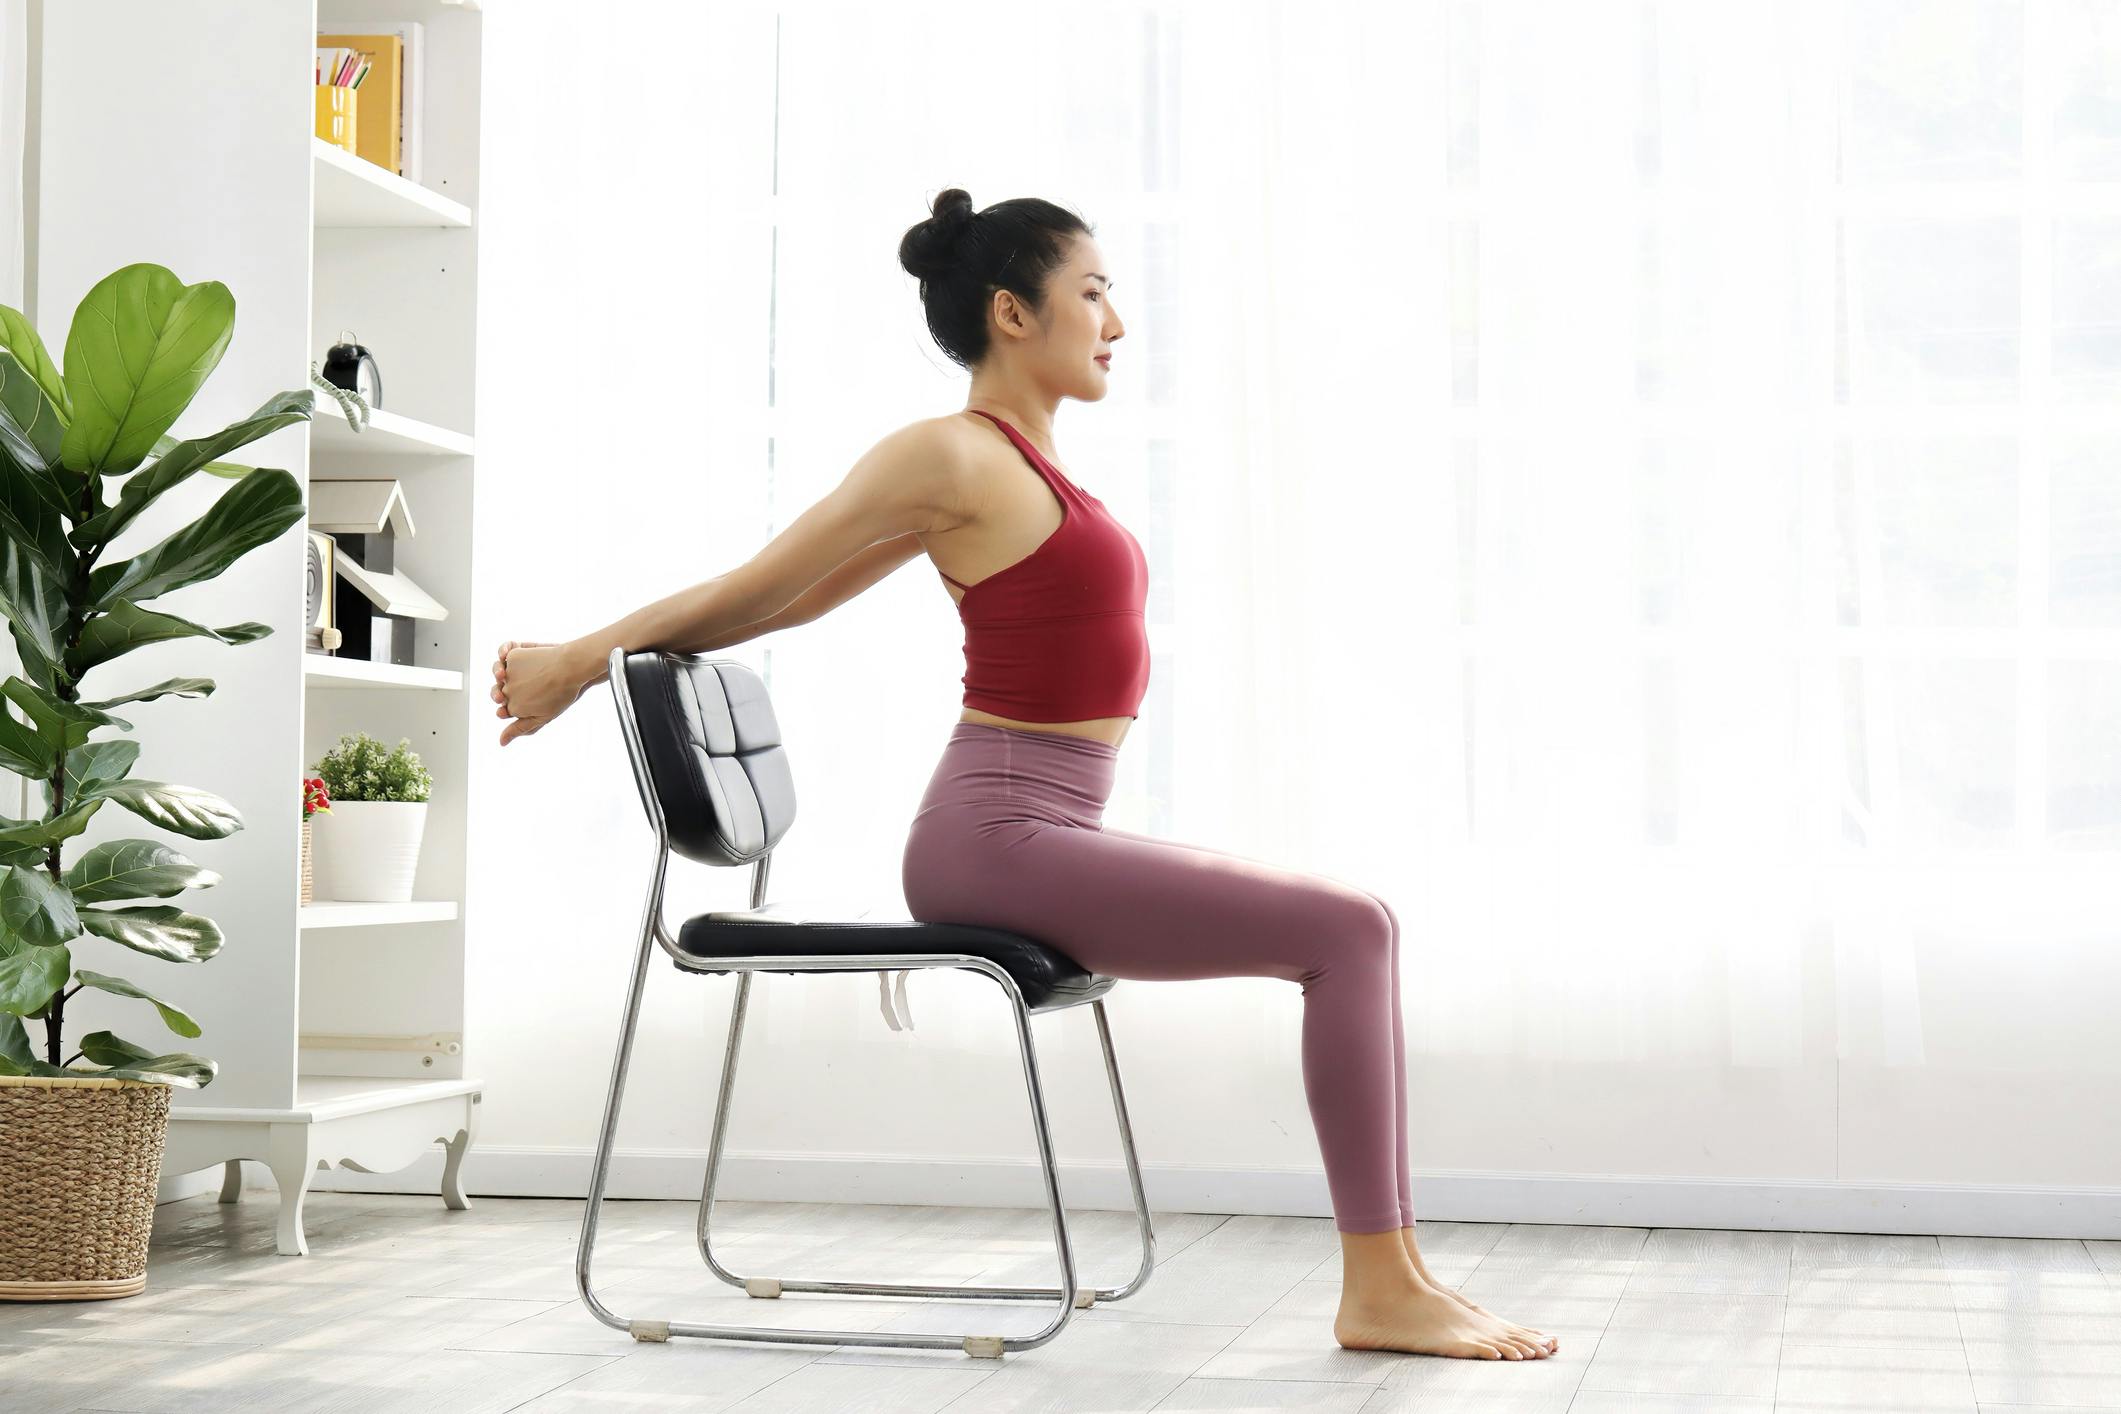 6 Benefits Of Chair Yoga + 8 Poses To Get You Started - DoYou